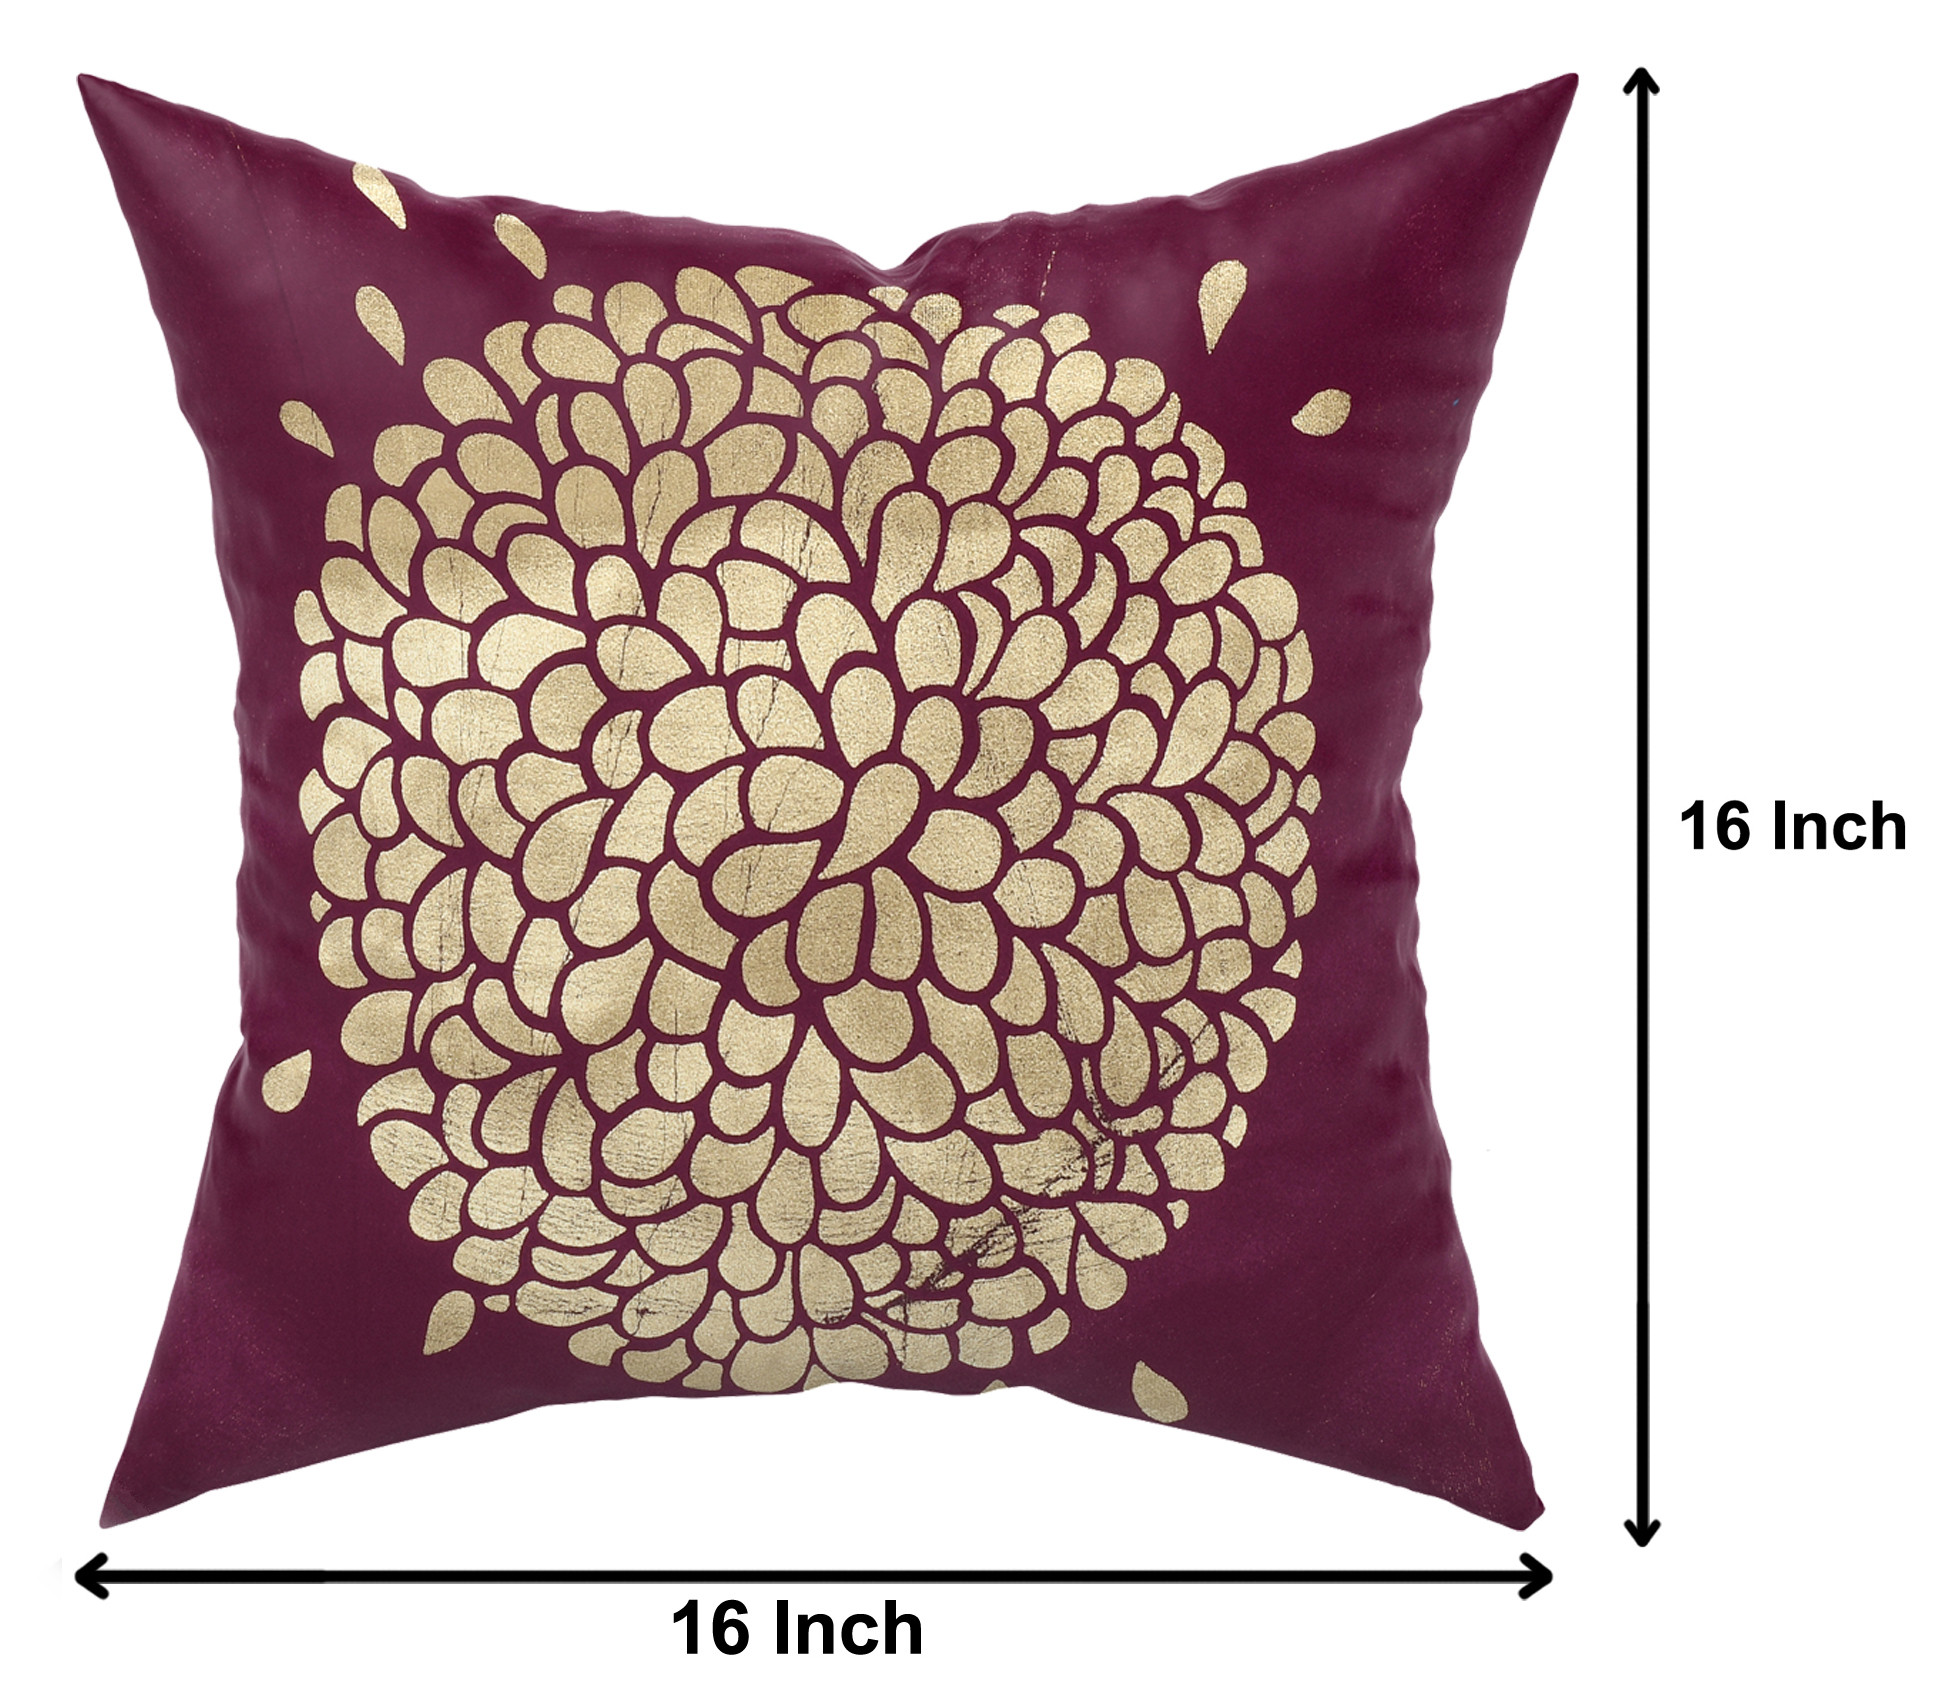 Kuber Industries Velvet Floral Design Soft Decorative Square Throw Pillow Cover, Cushion Covers, Pillow Case For Sofa Couch Bed Chair 16x16 Inch-(Purple)